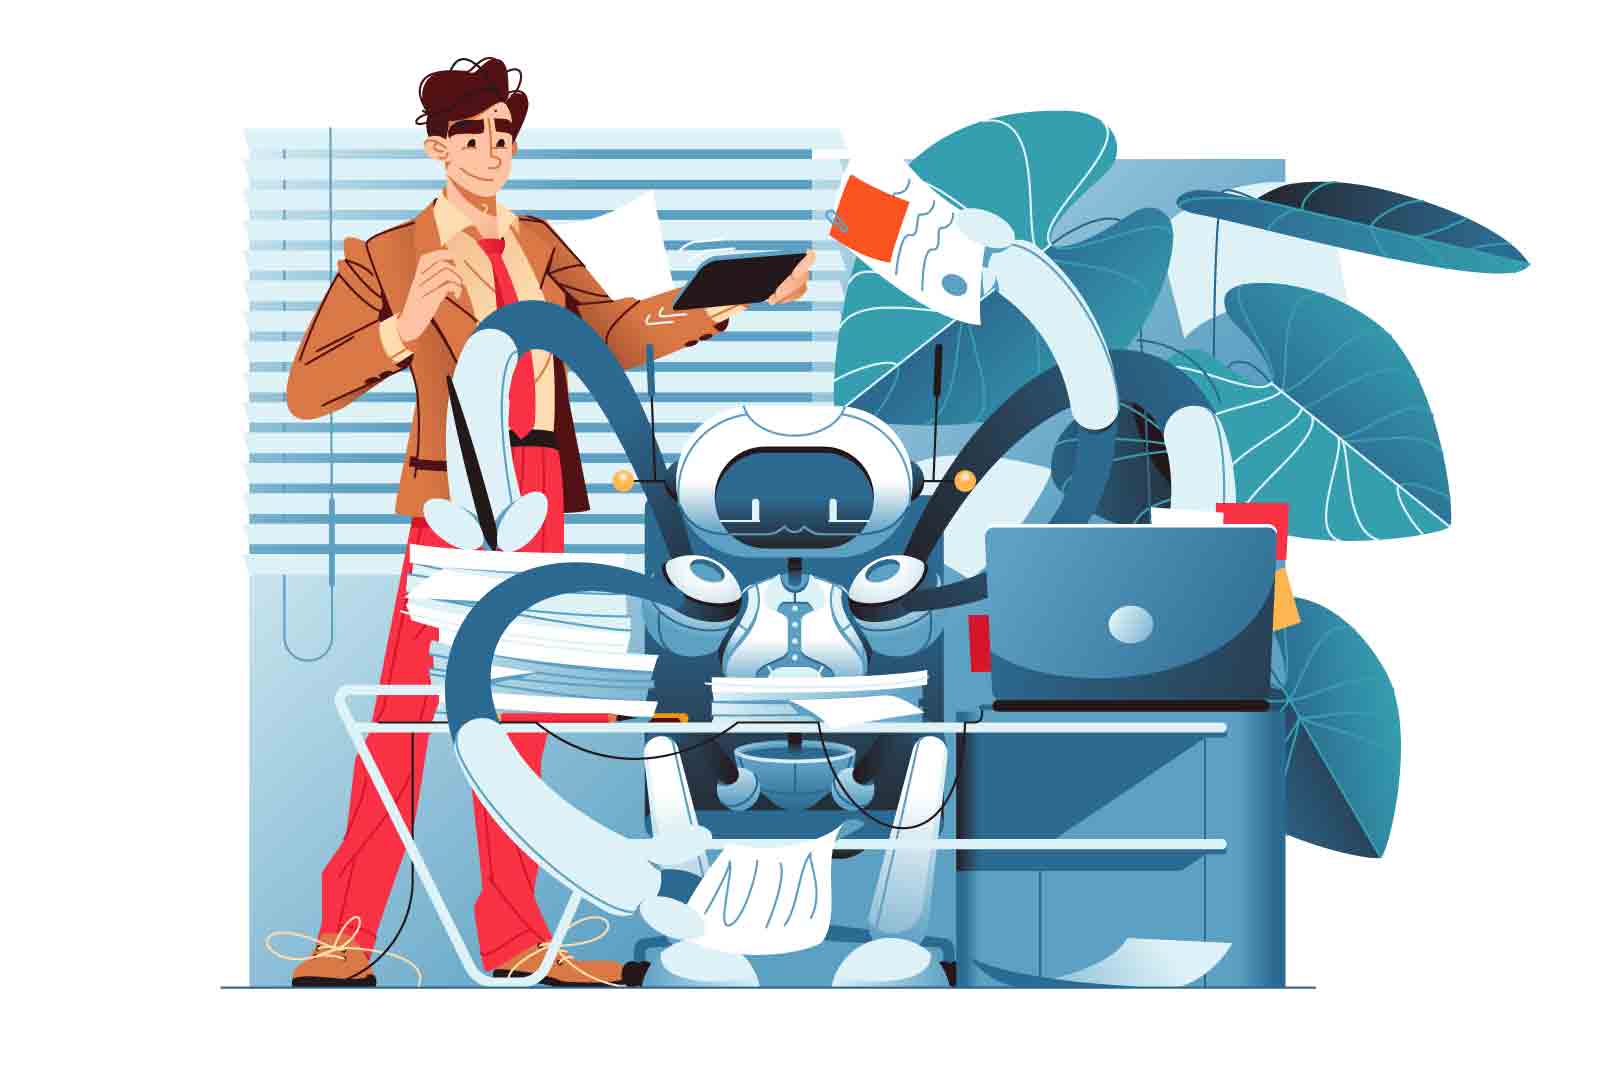 Robot helps human to do work, vector illustration. Work automation with AI help, business documents processing.